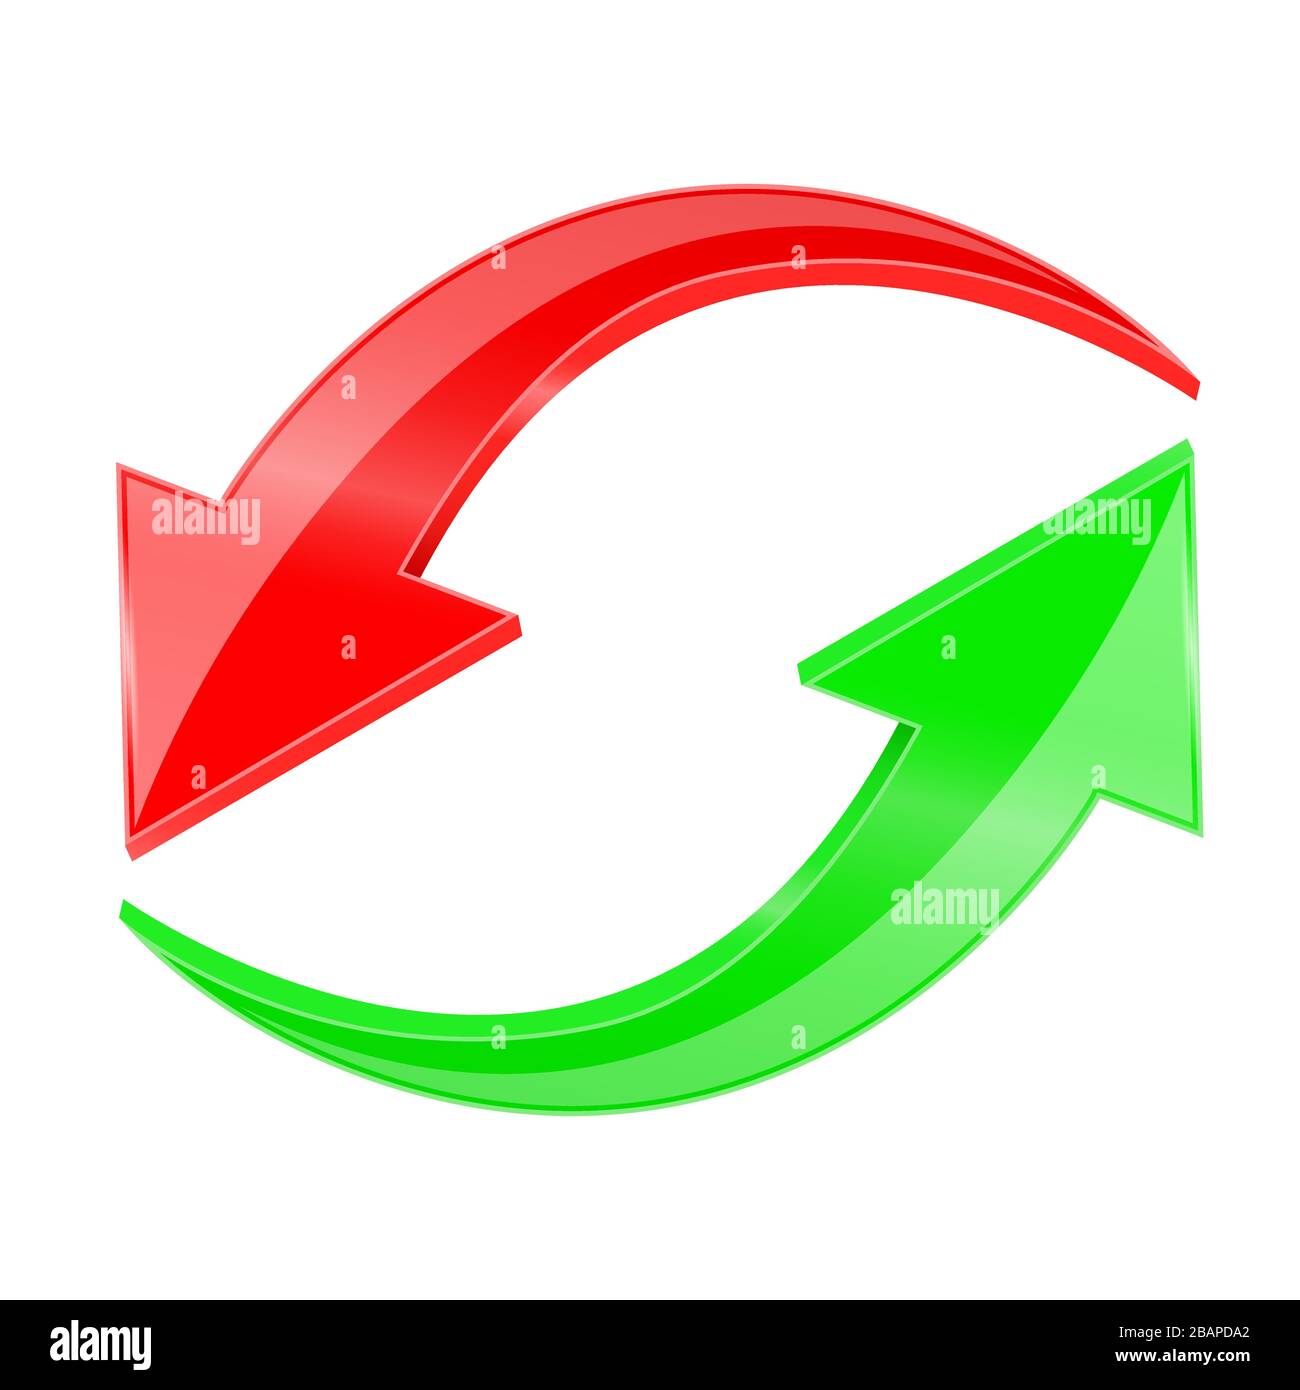 Red and green arrows in circular motion Stock Vector